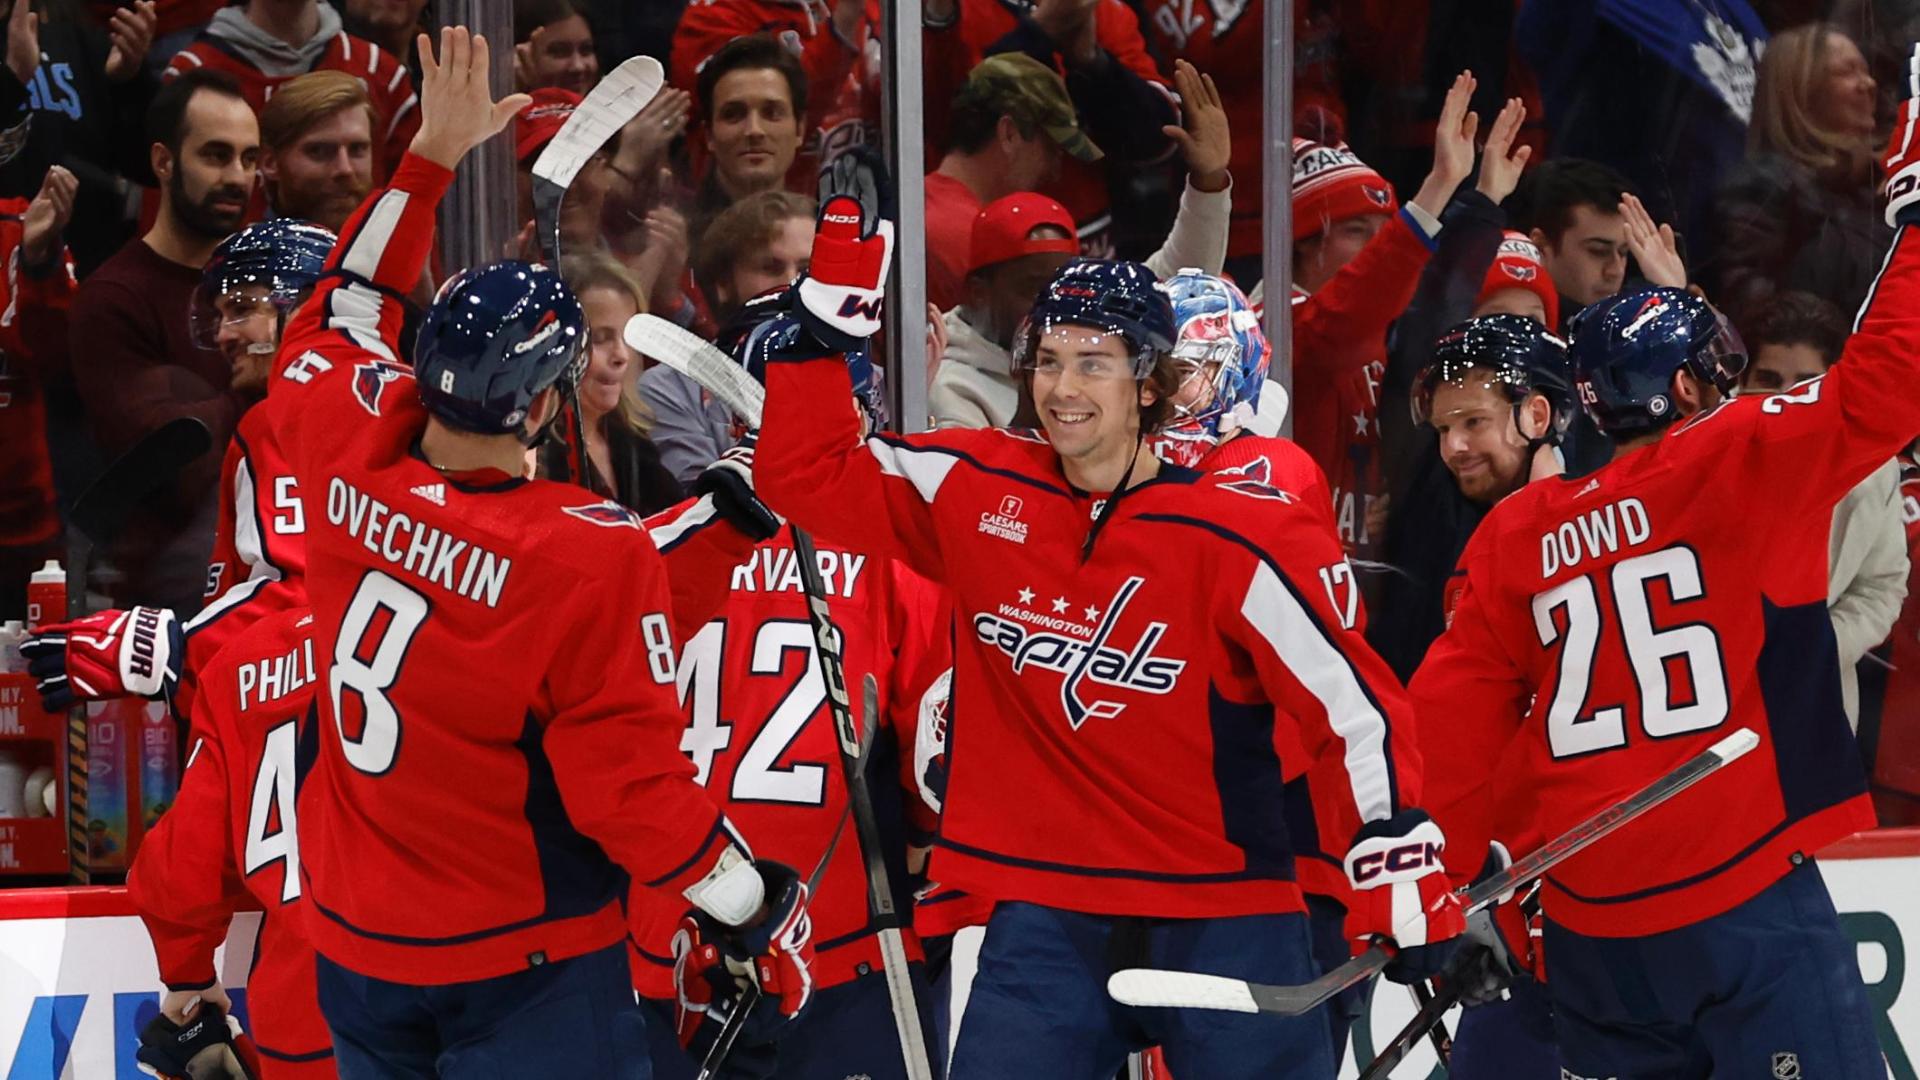 Dylan Strome wins it for the Capitals in OT